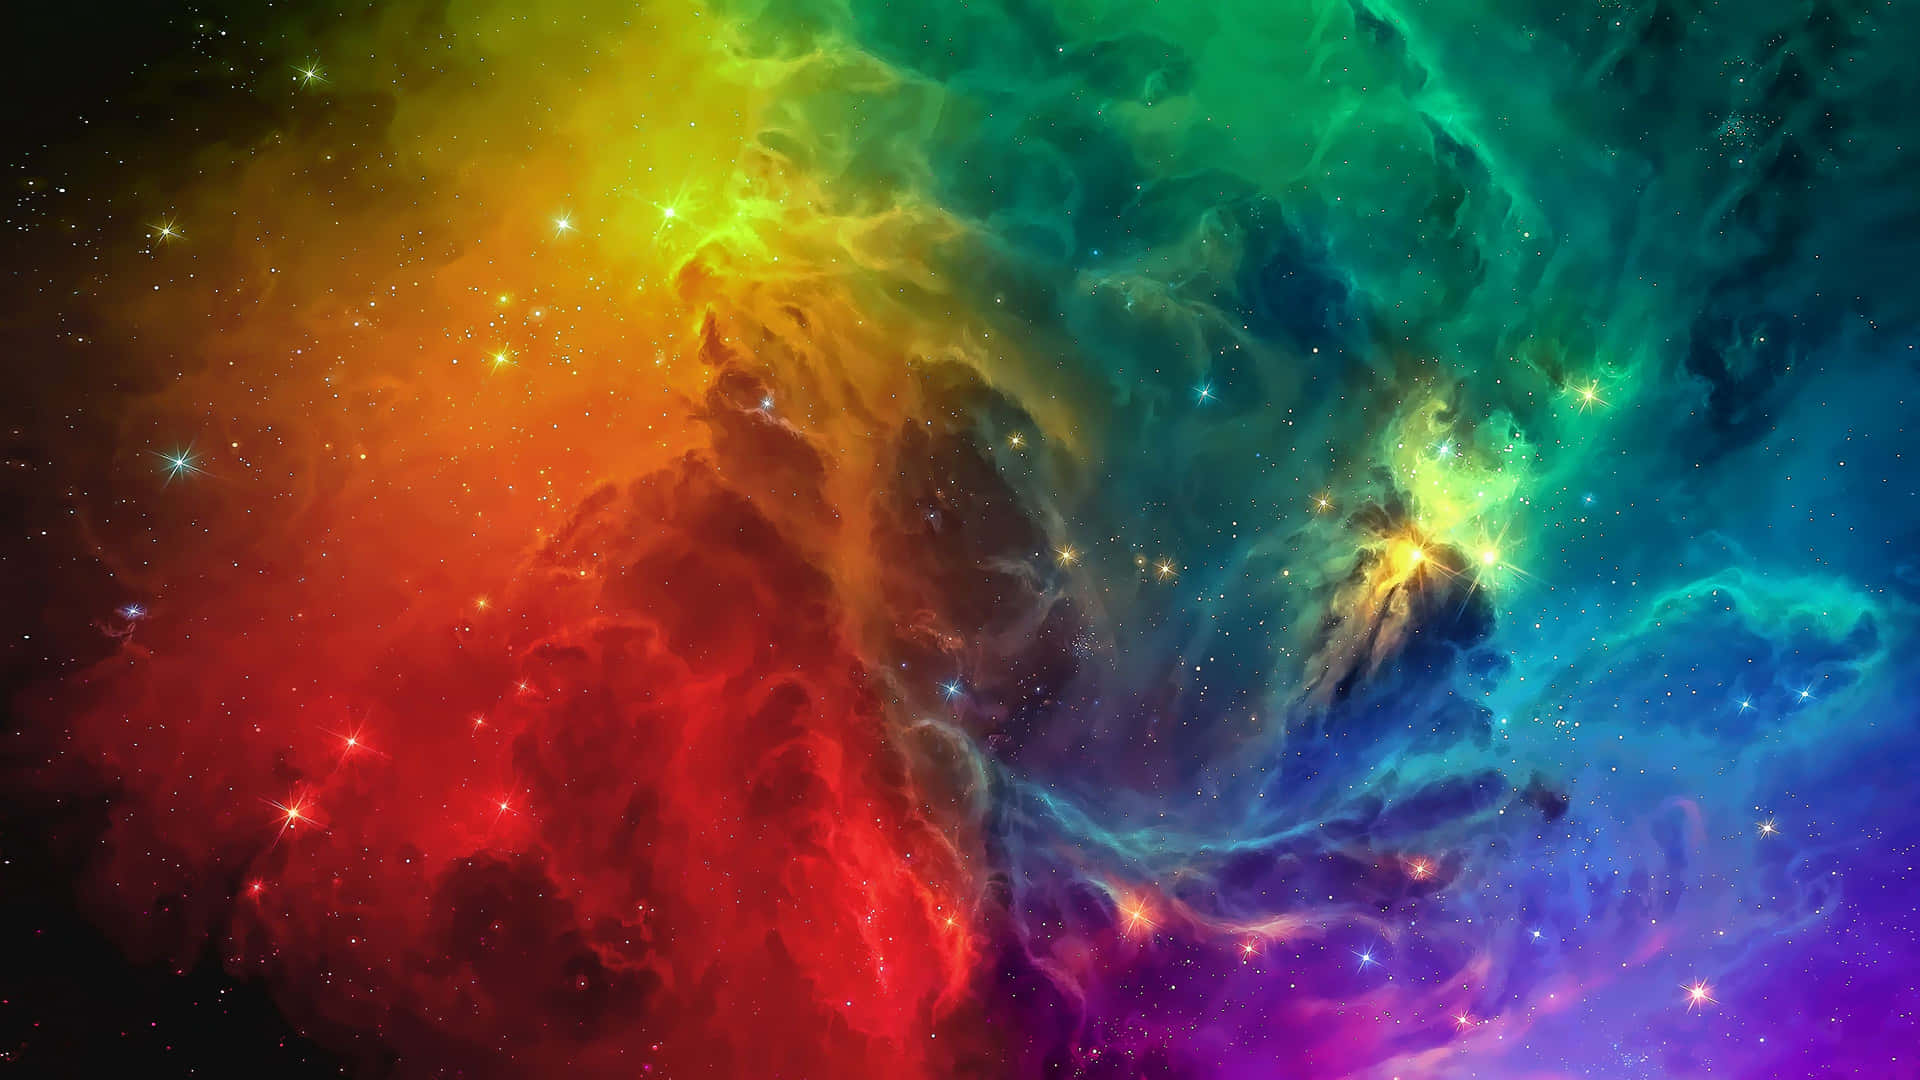 Colorful Space Galaxy Wallpaper